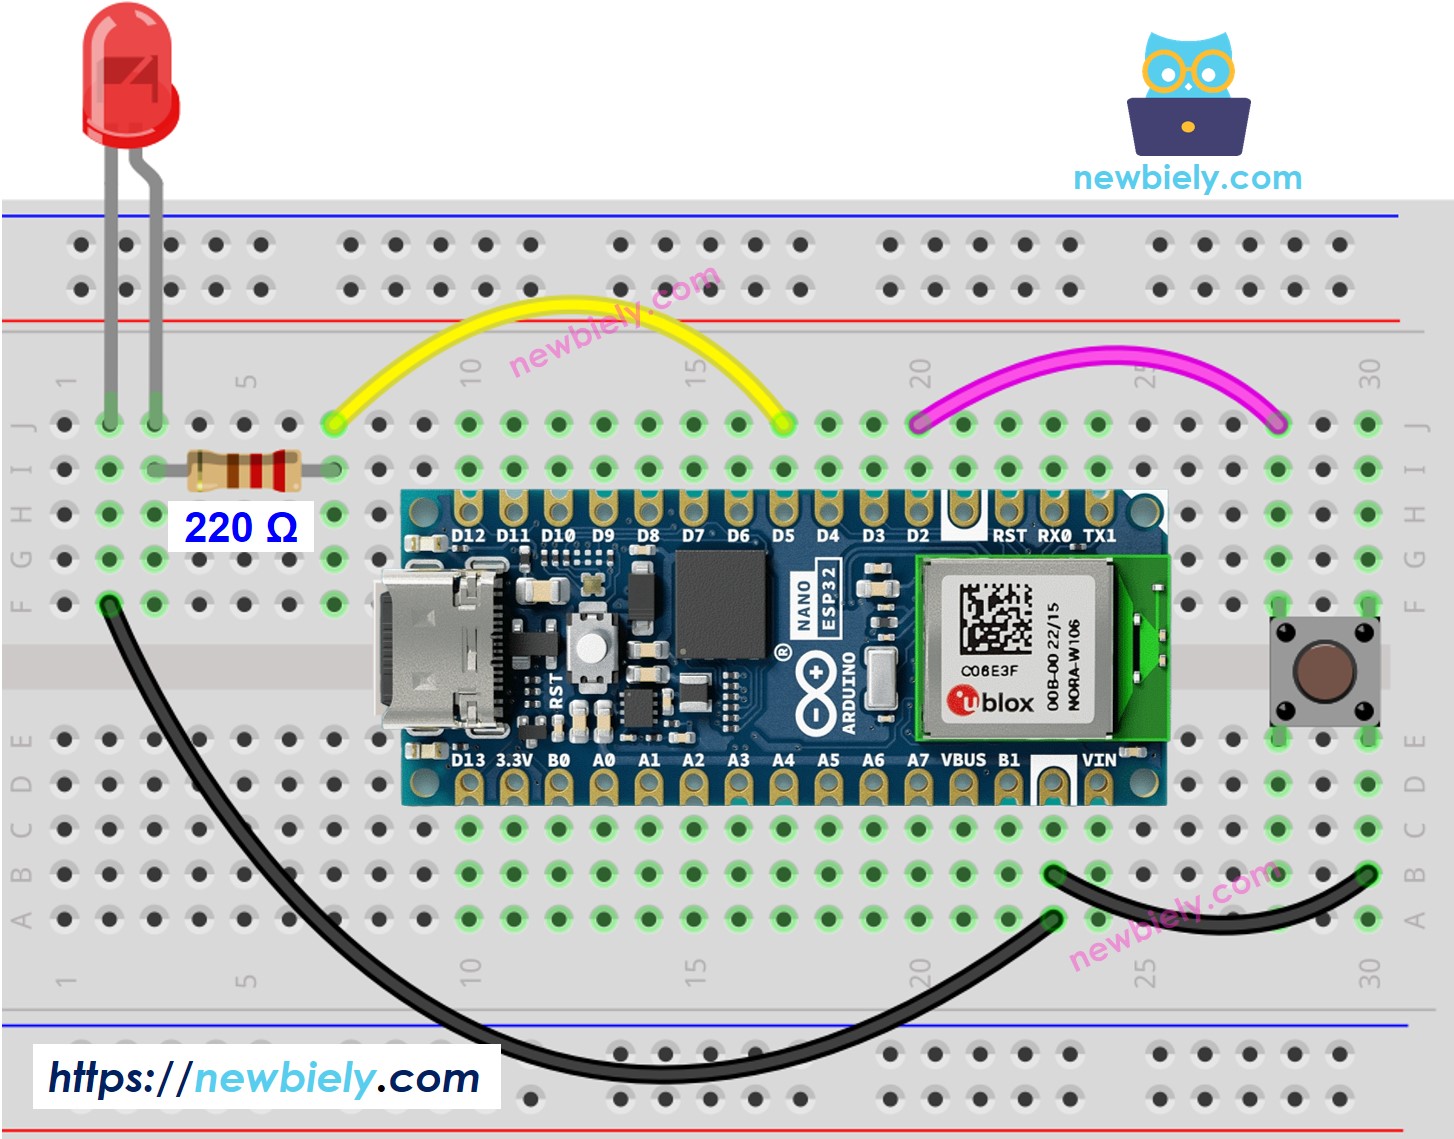 The wiring diagram between Arduino Nano ESP32 and LED button